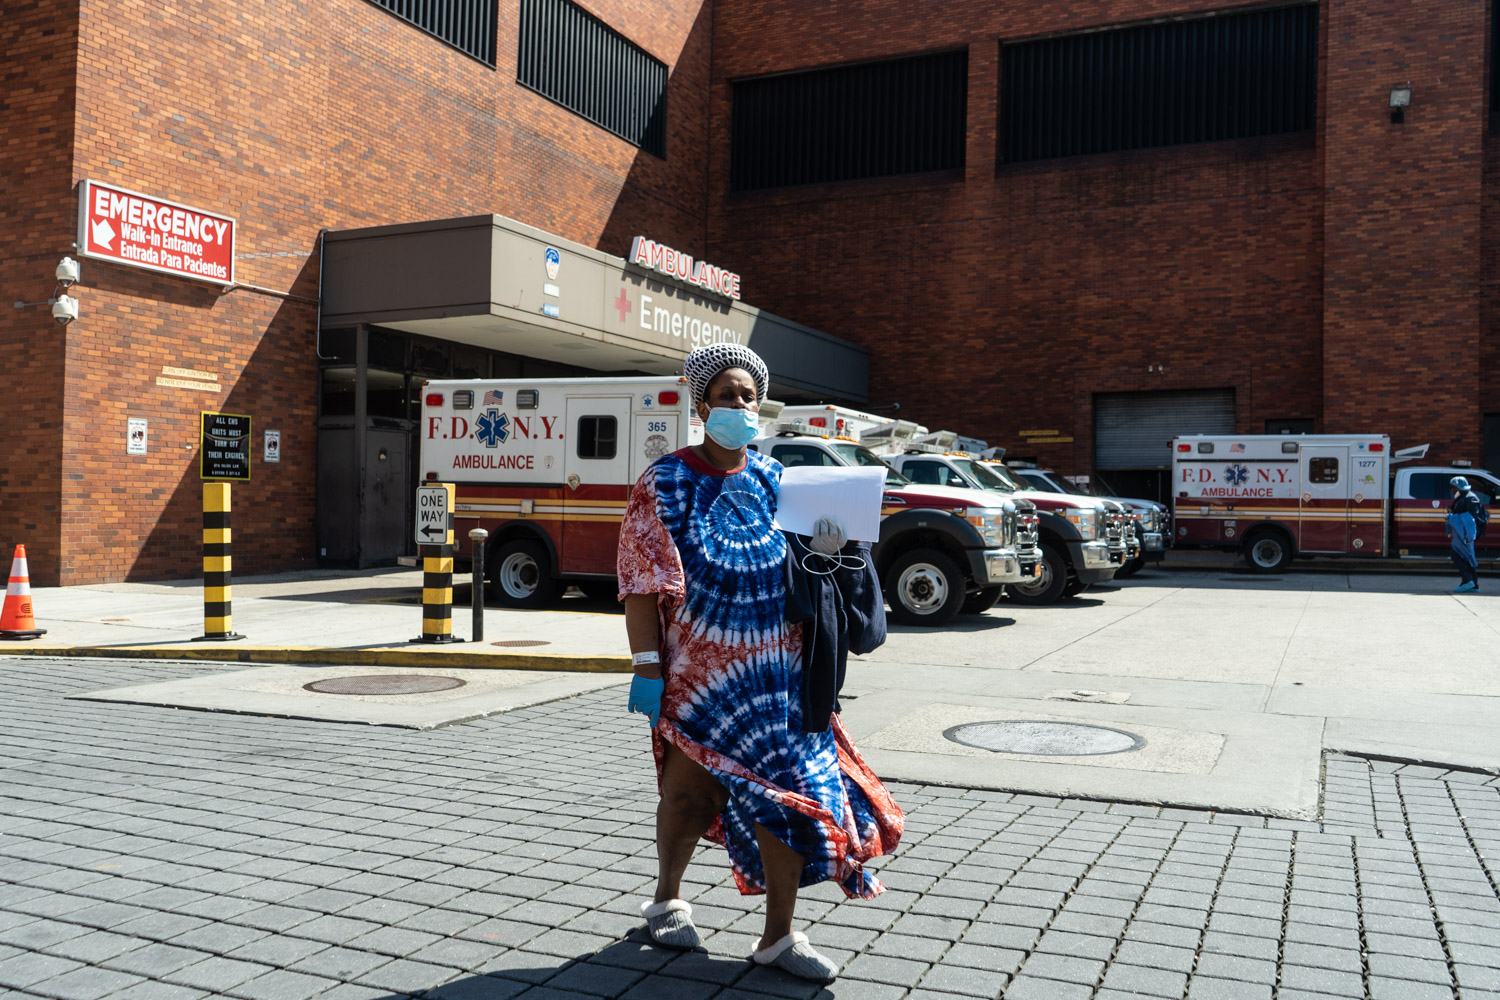 April 19, 2020: Outside the emergency entrance at Lincoln Medical Center on East 149th Street, Bronx, New York. © Camilo José Vergara